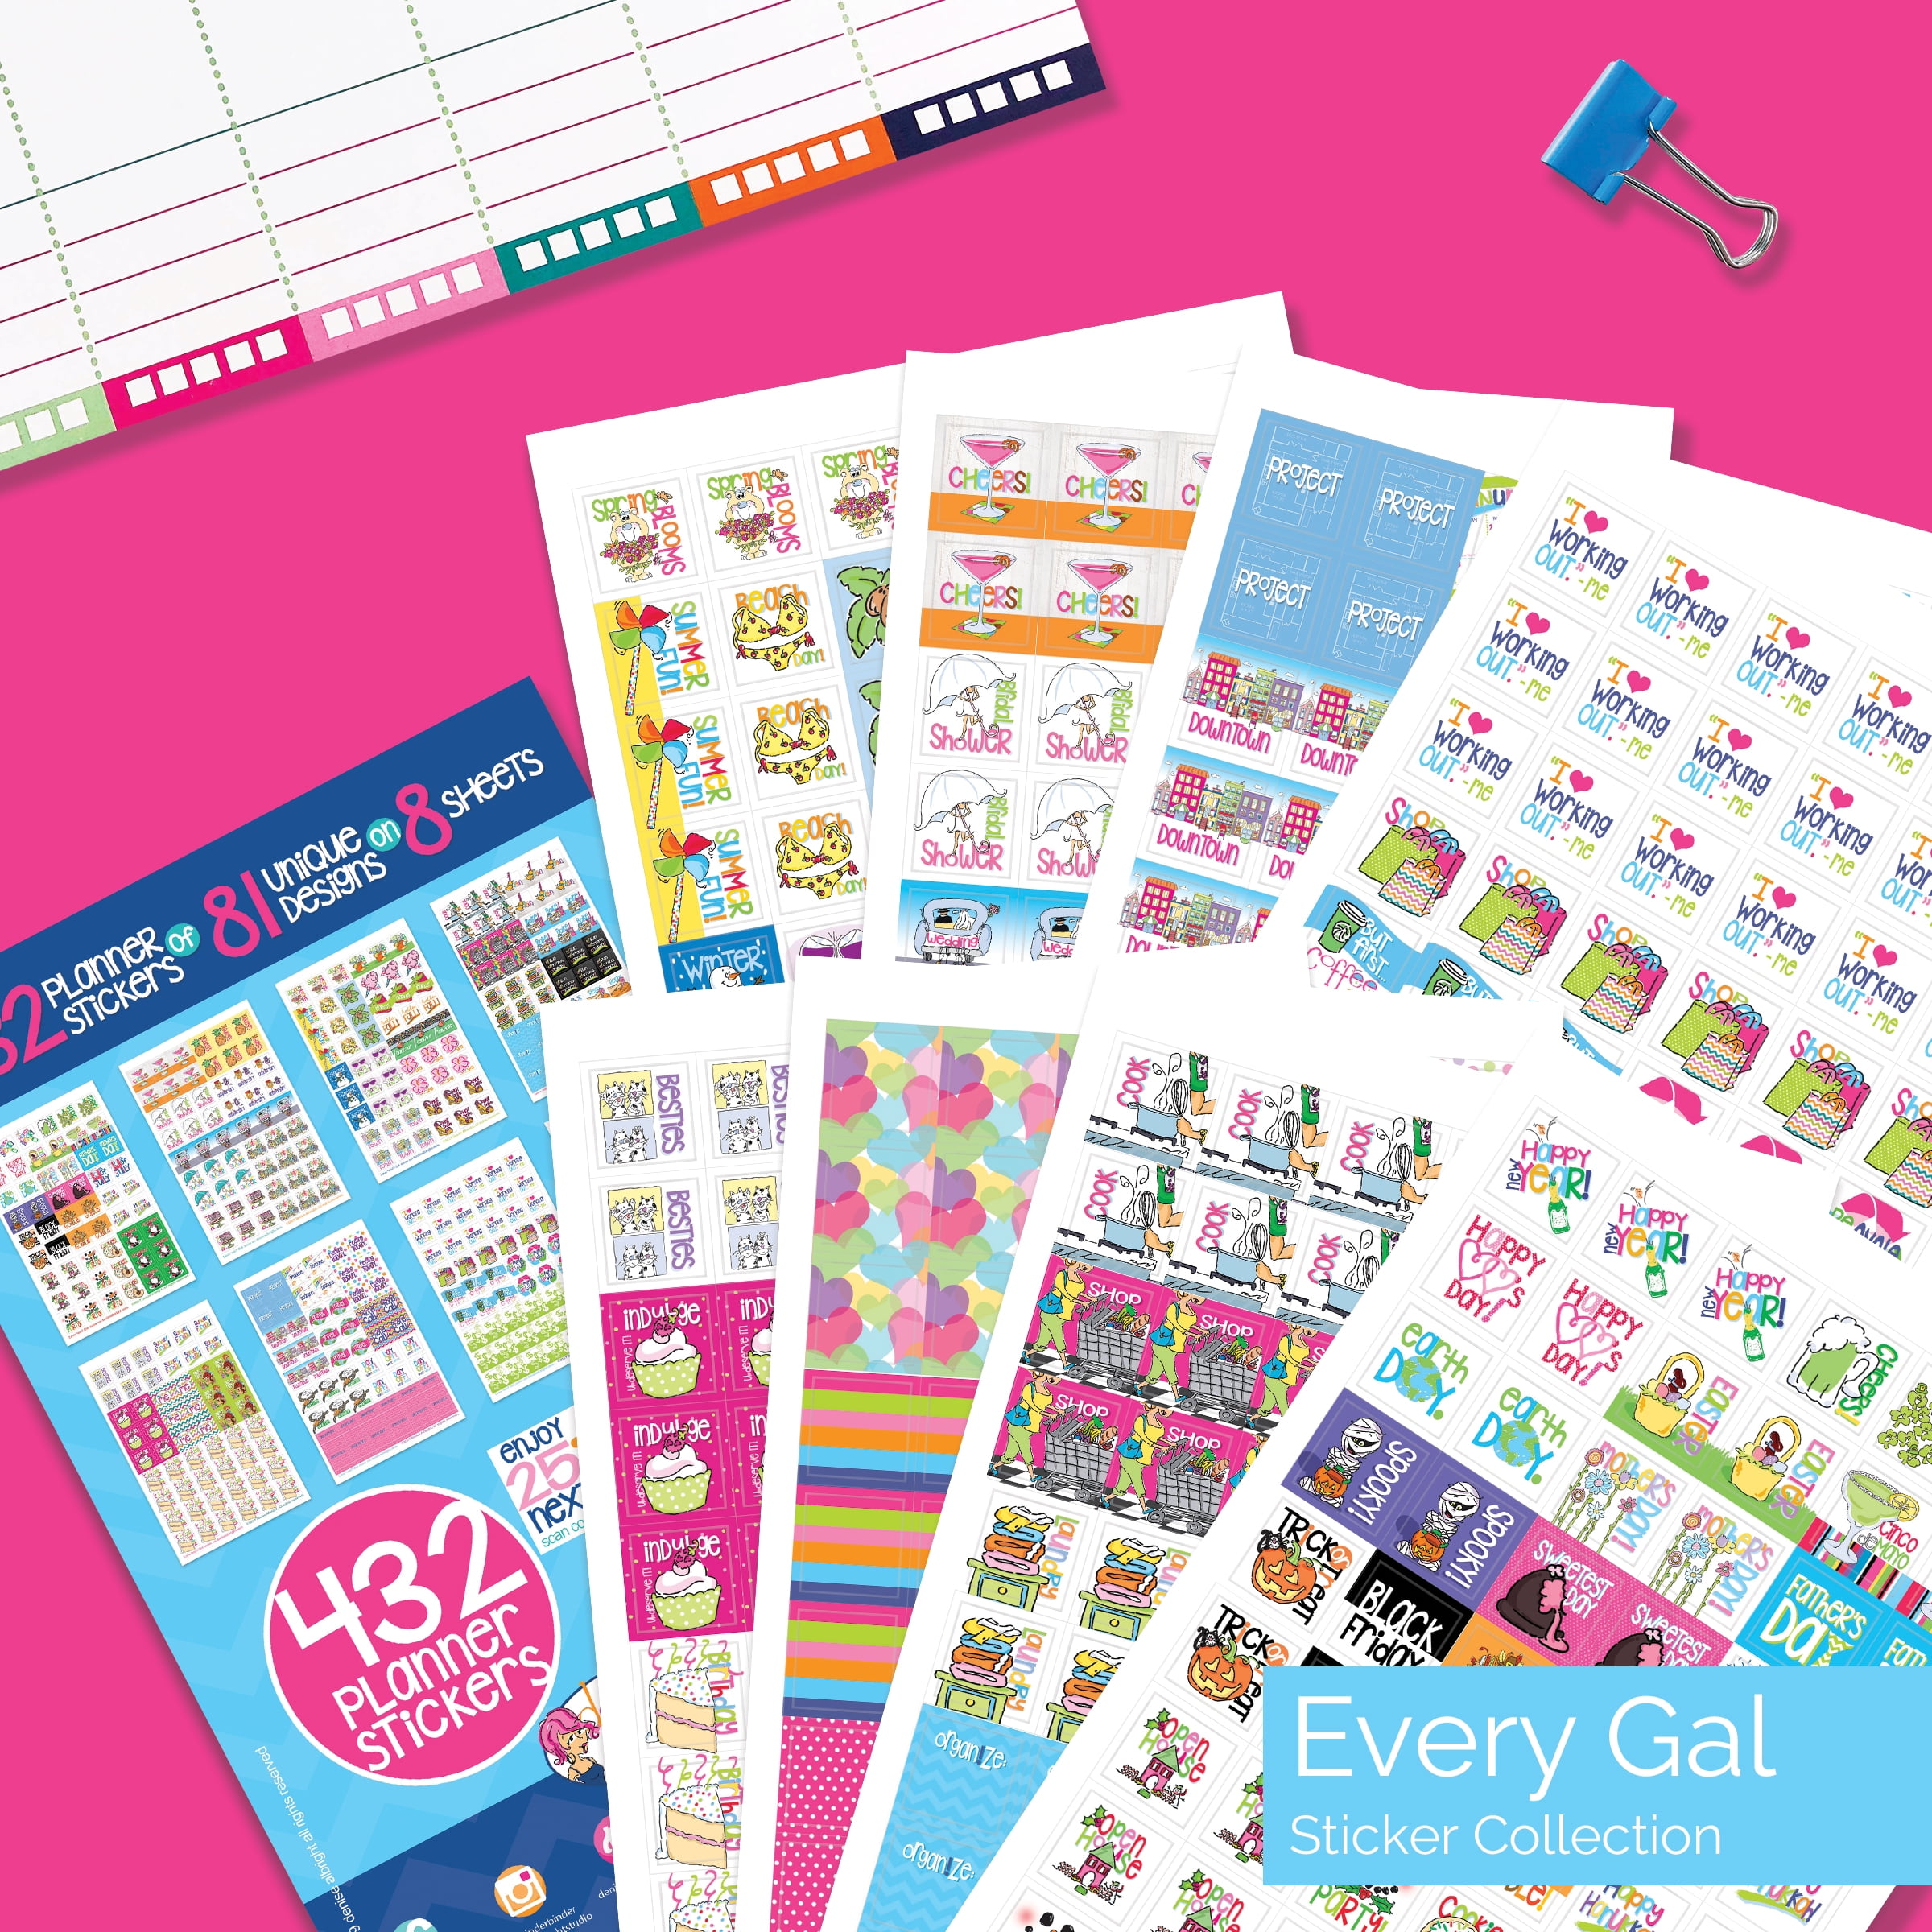 181 family life events Calendar stickers/Planner stickers (#4)